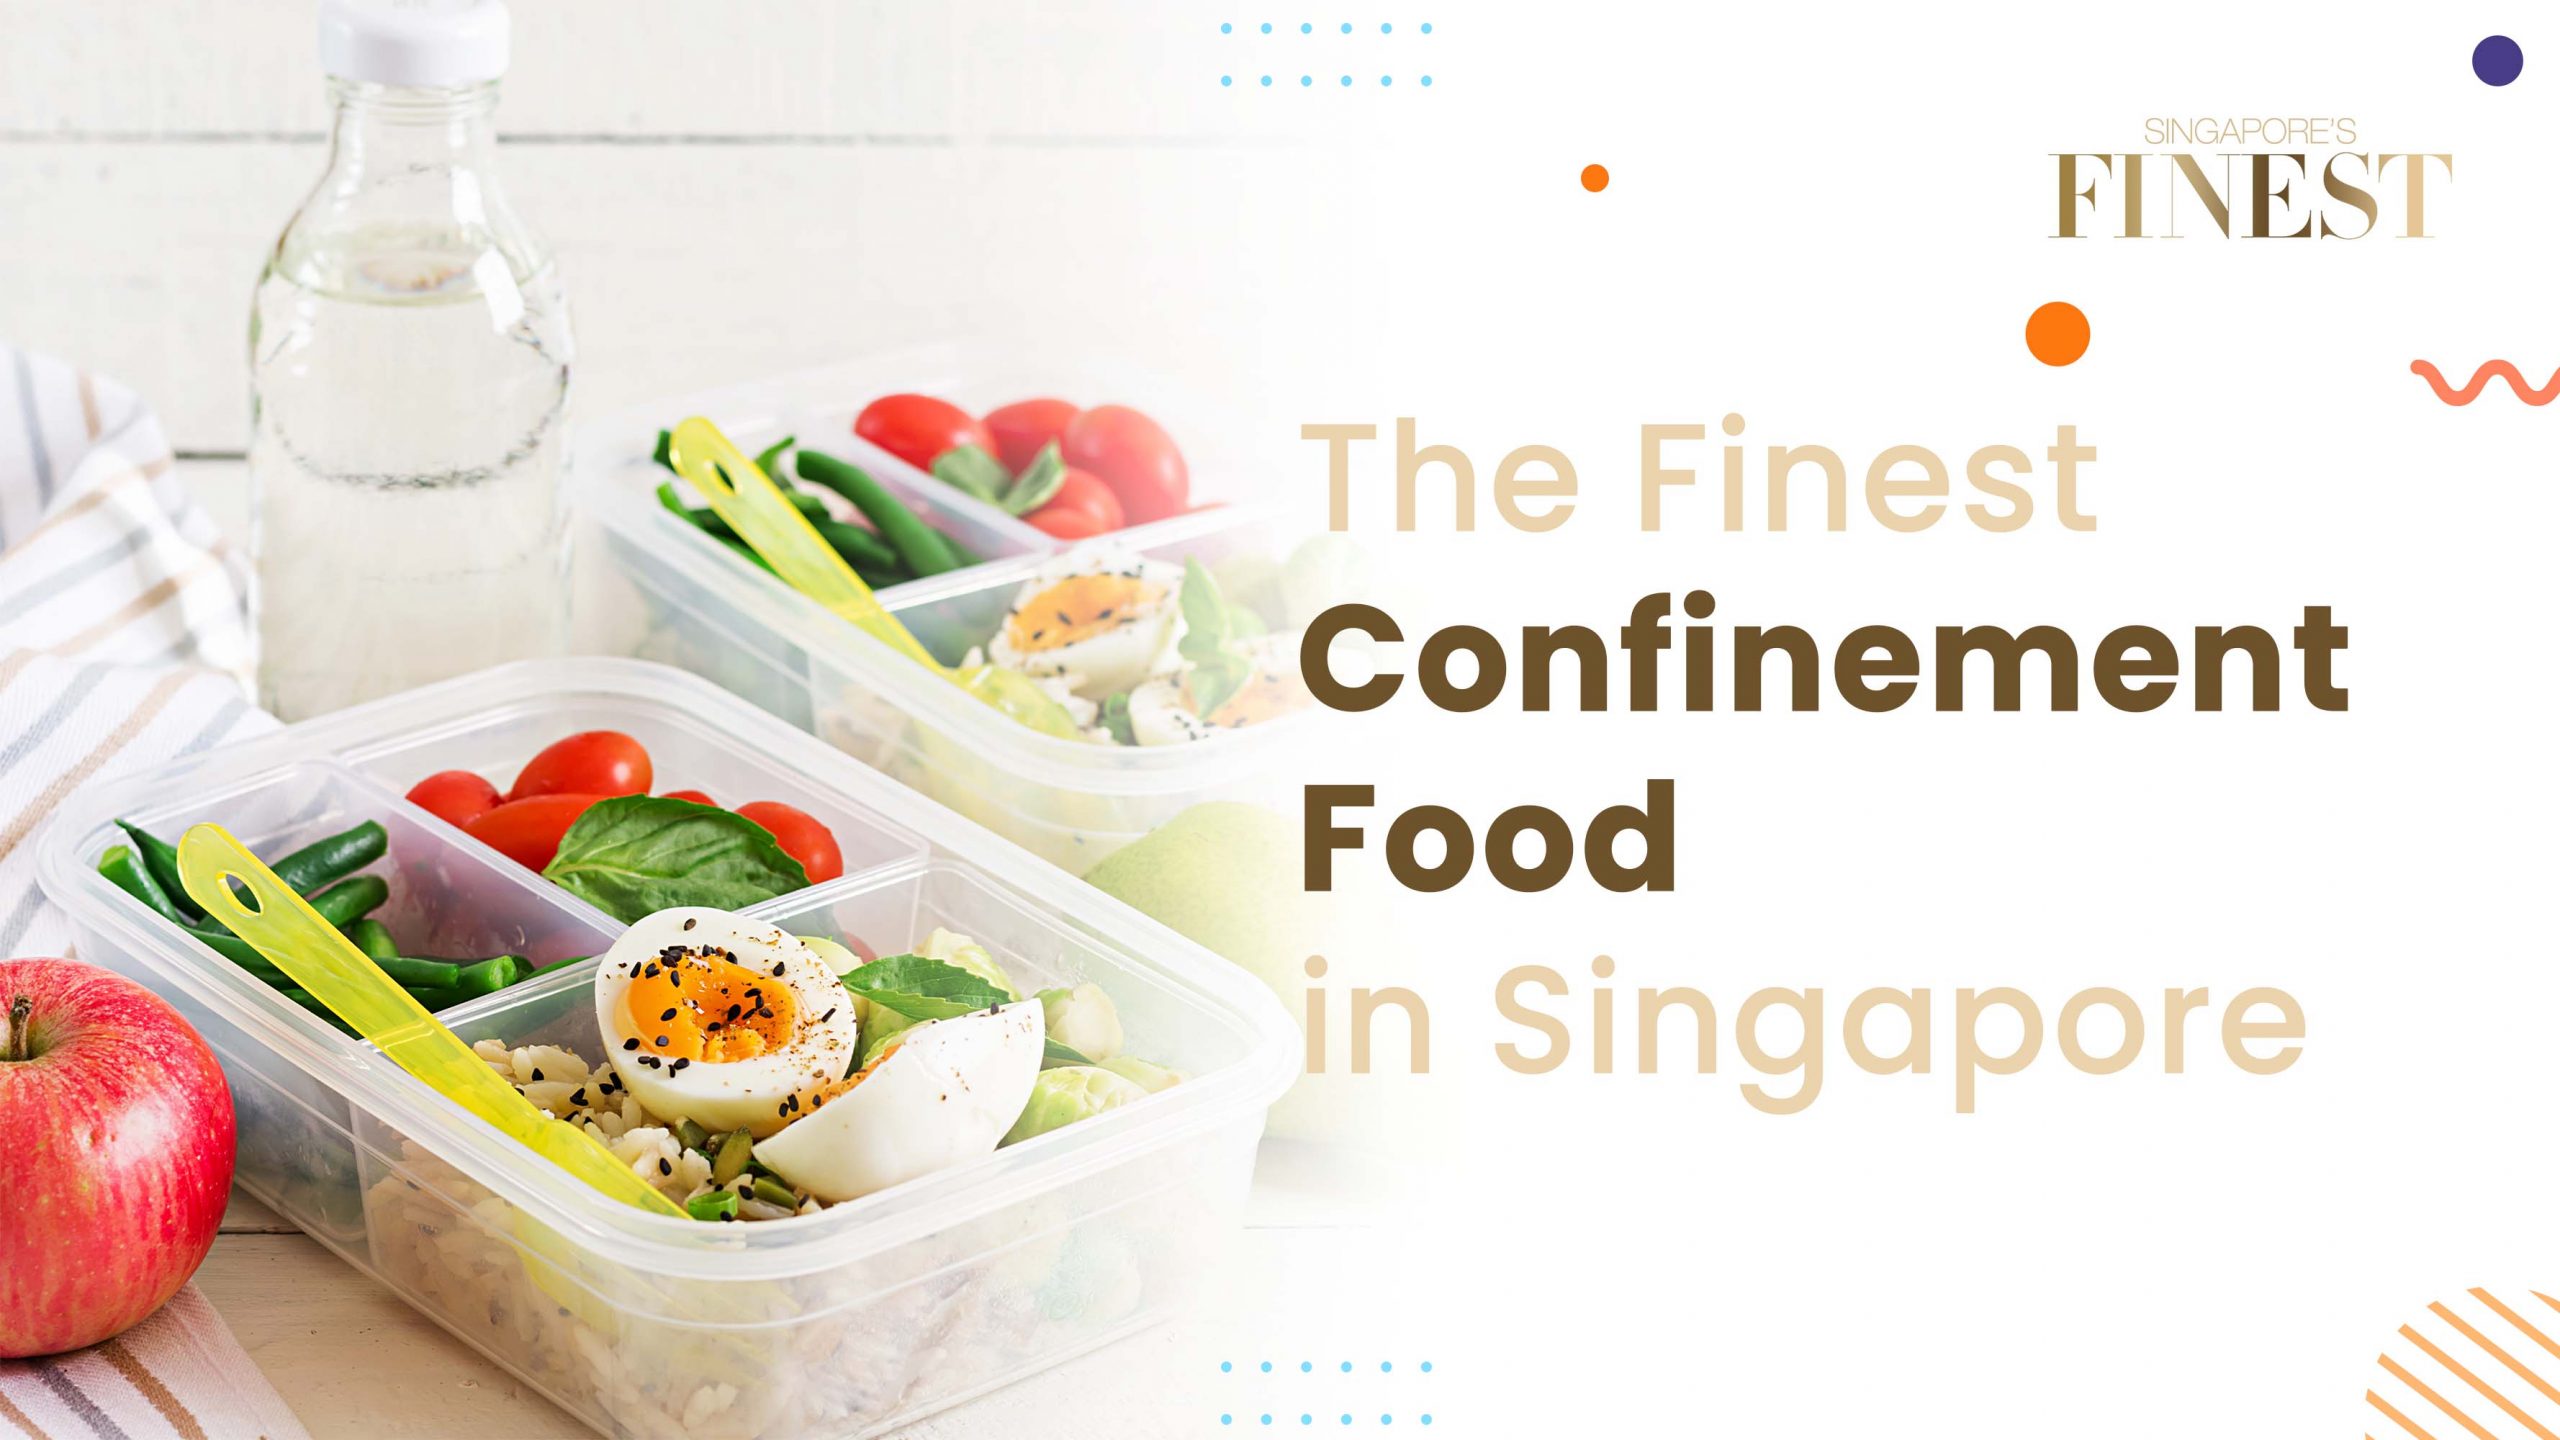 Finest Confinement Food in Singapore